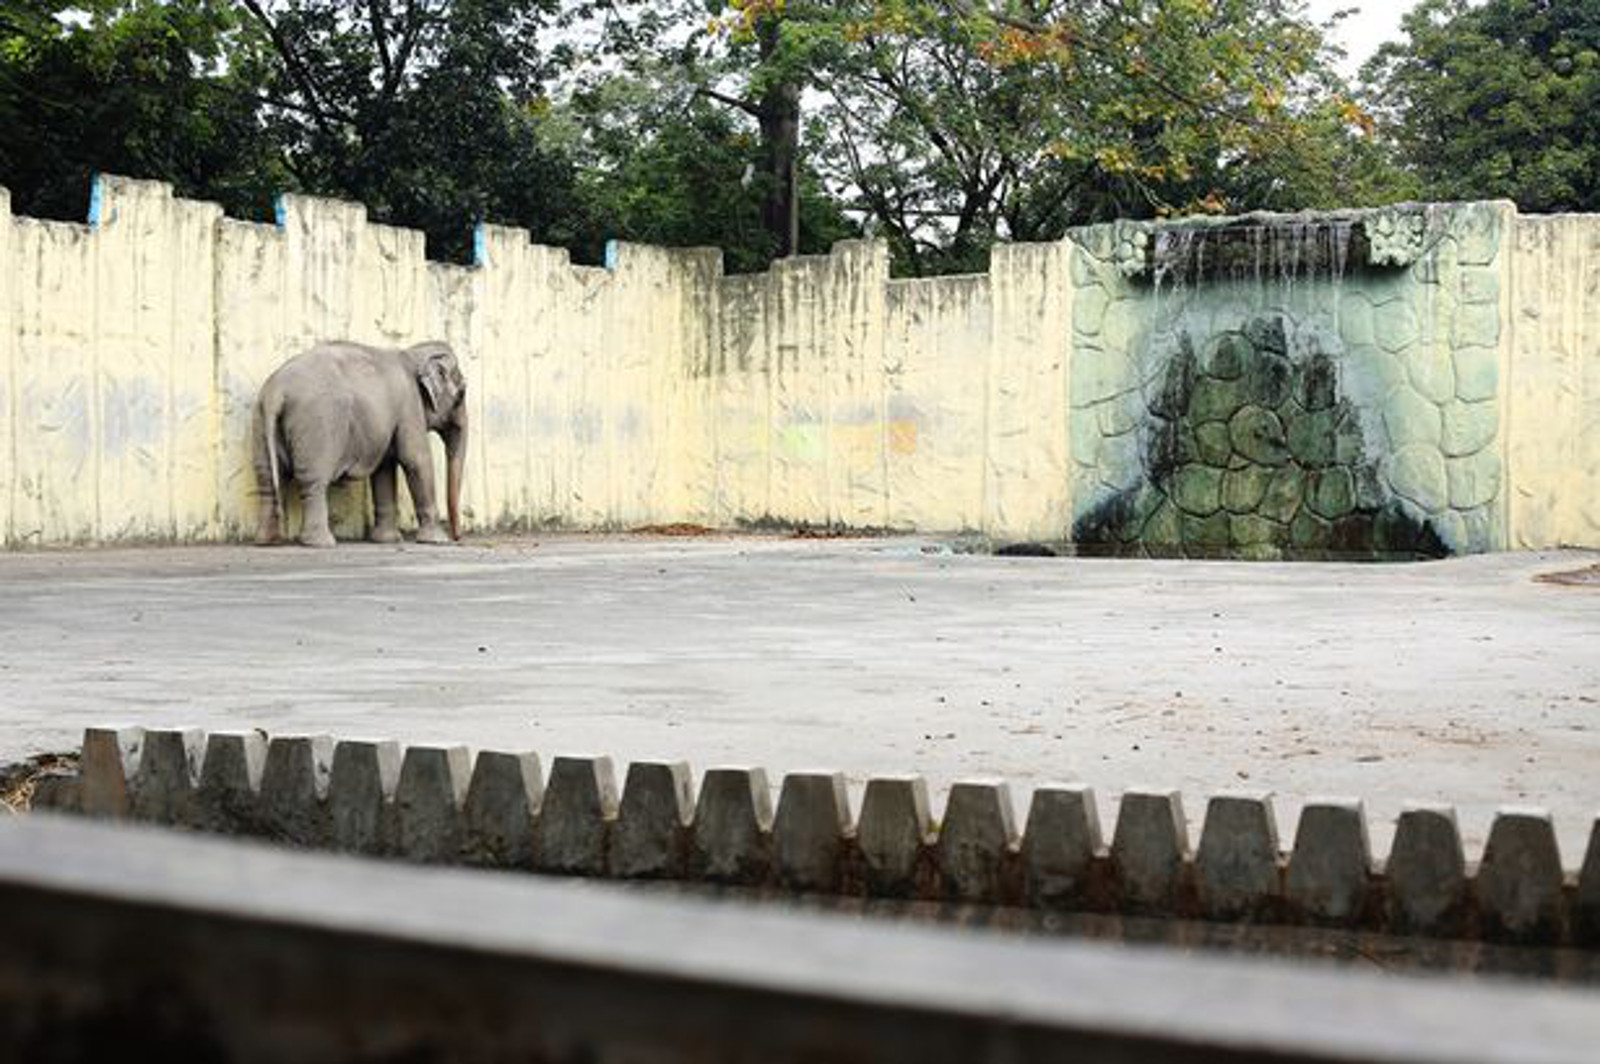 Time is Running out for Mali, the Elephant!